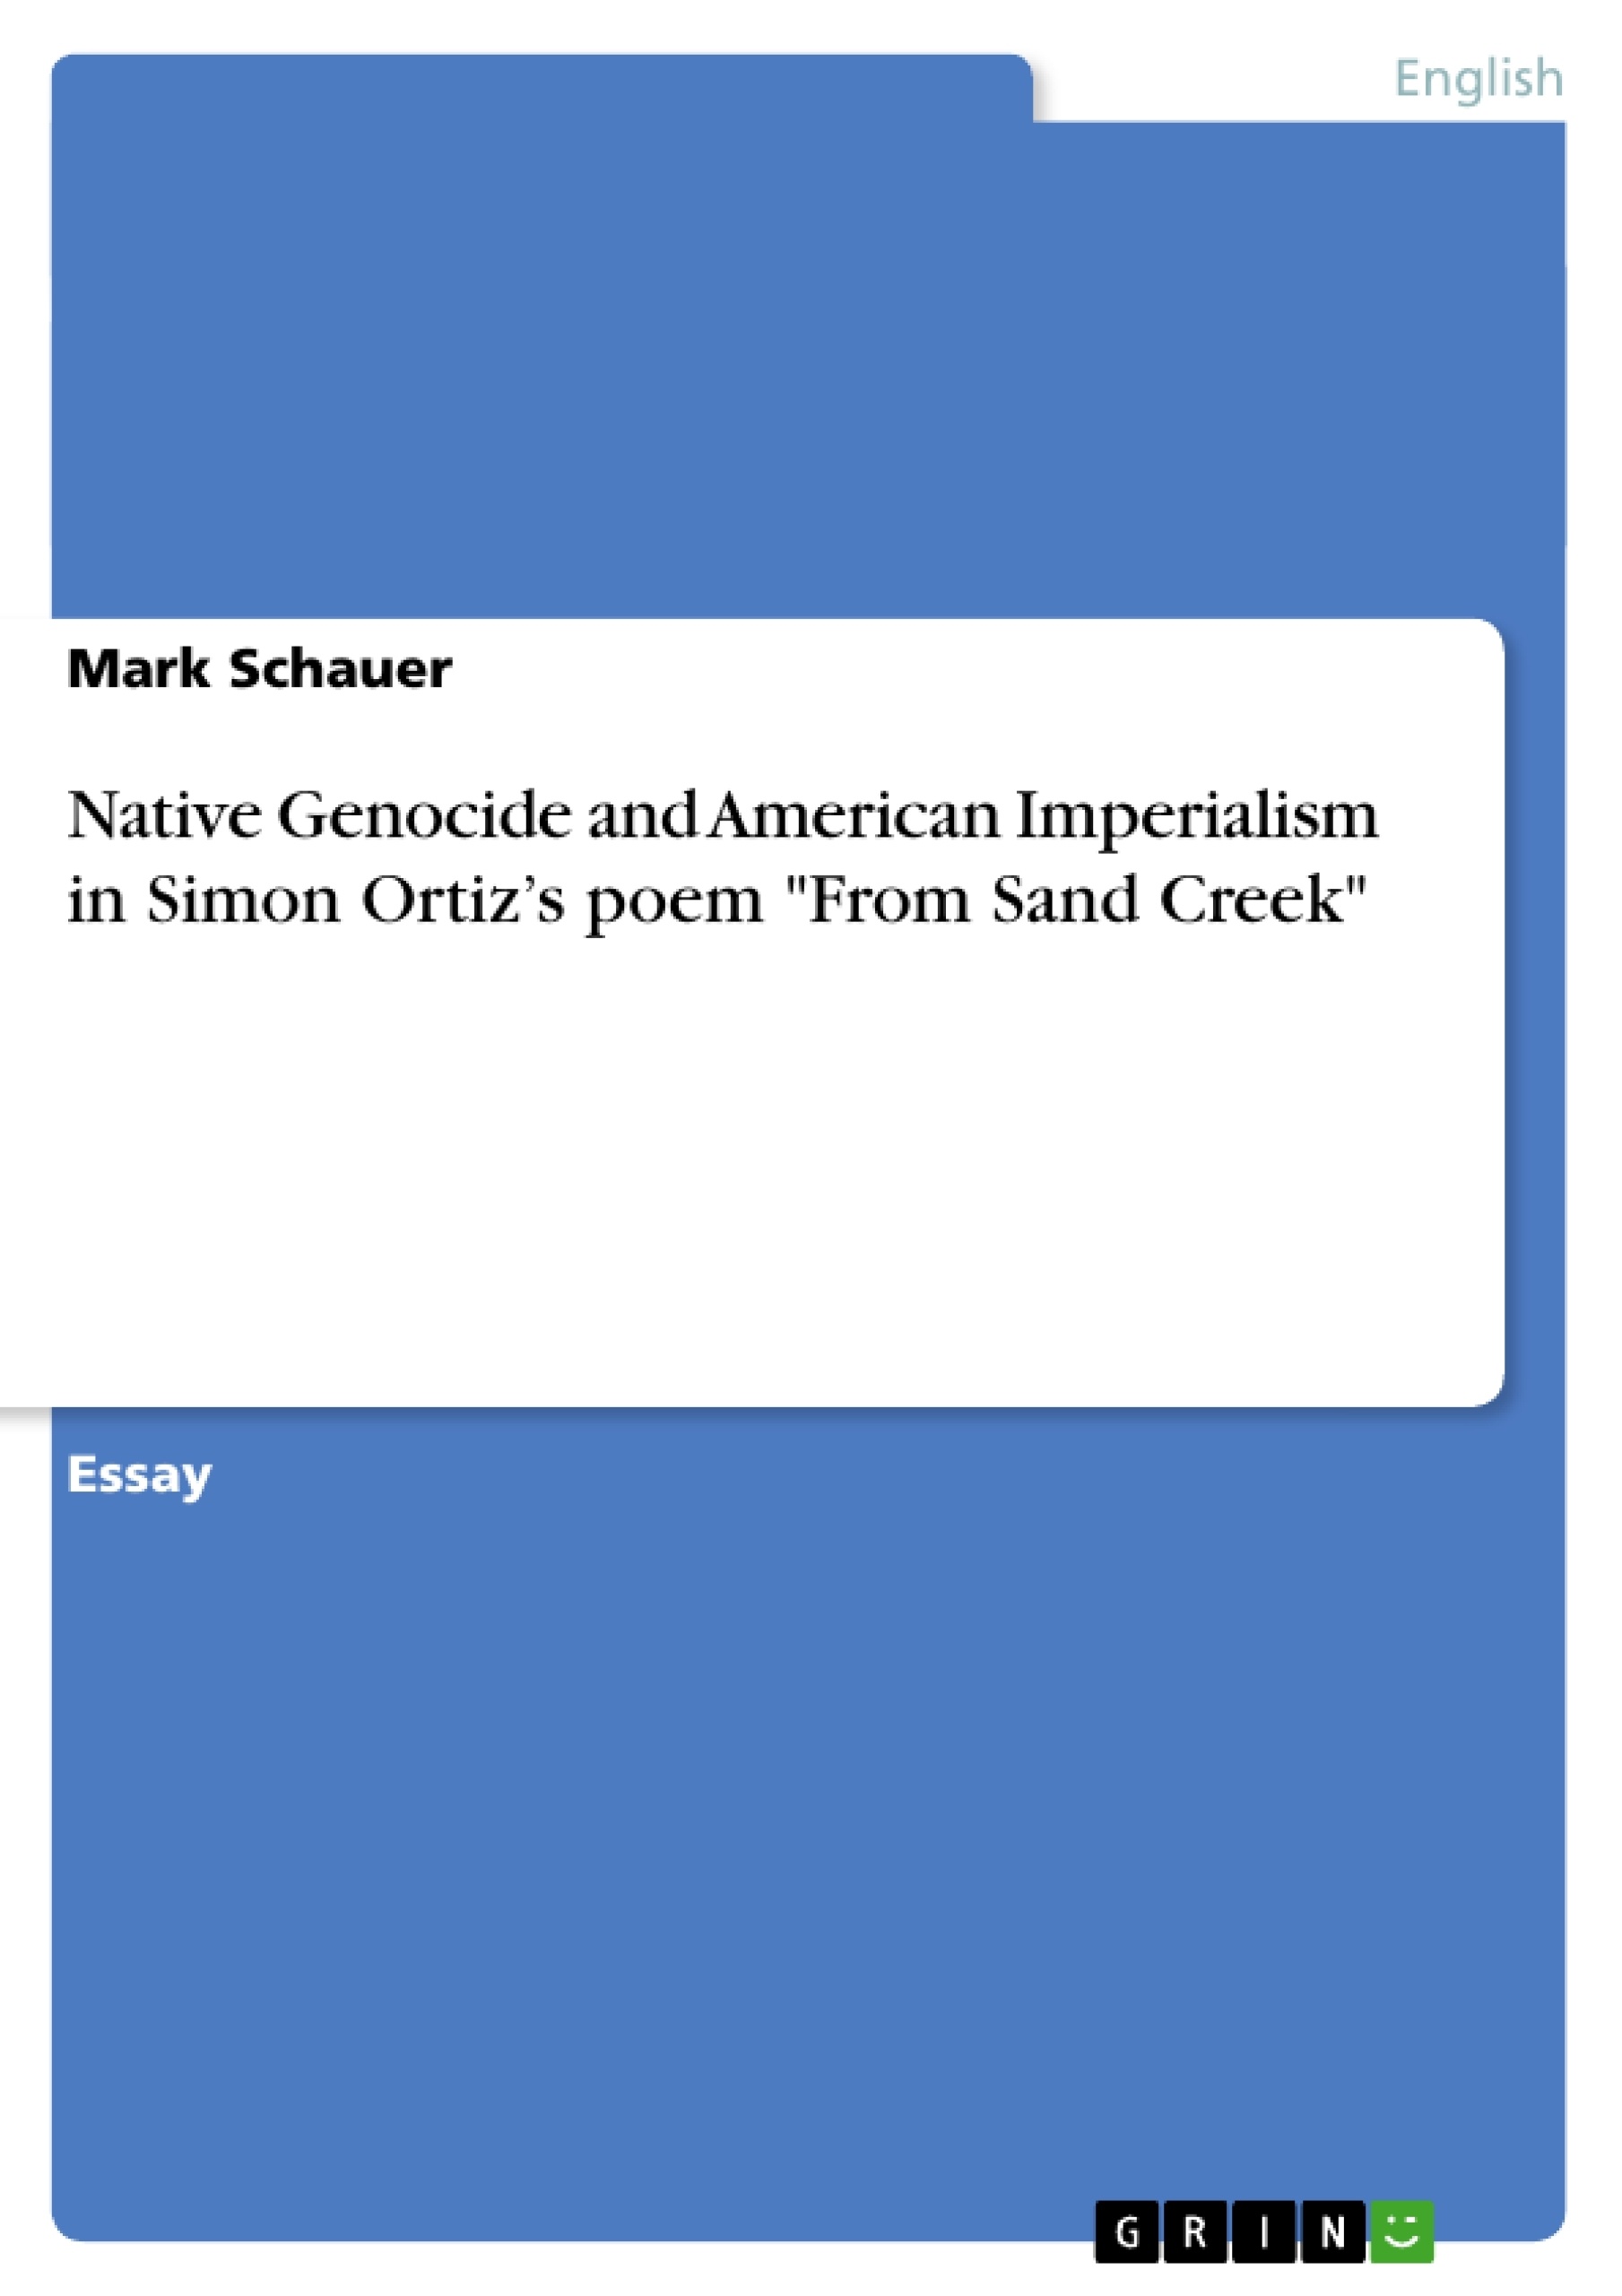 Title: Native Genocide and American Imperialism in Simon Ortiz’s poem "From Sand Creek"